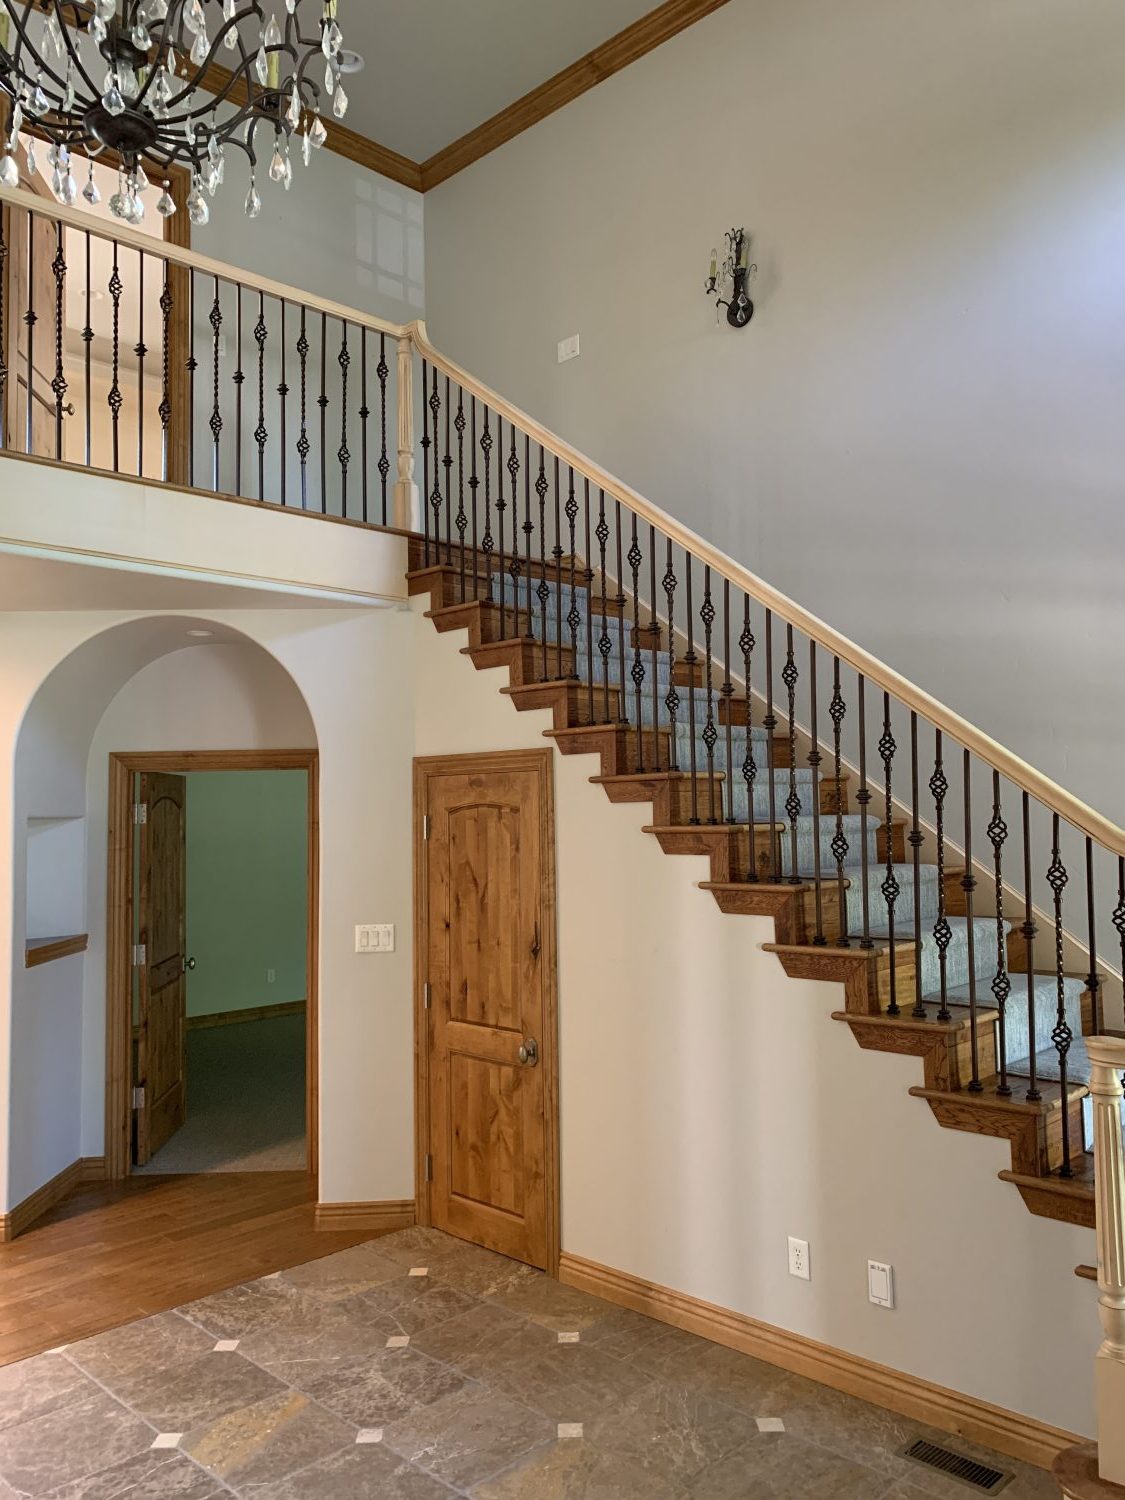 The Top Staircase Railing Inspiration Photos We Re Using To Design Ours Chris Loves Julia